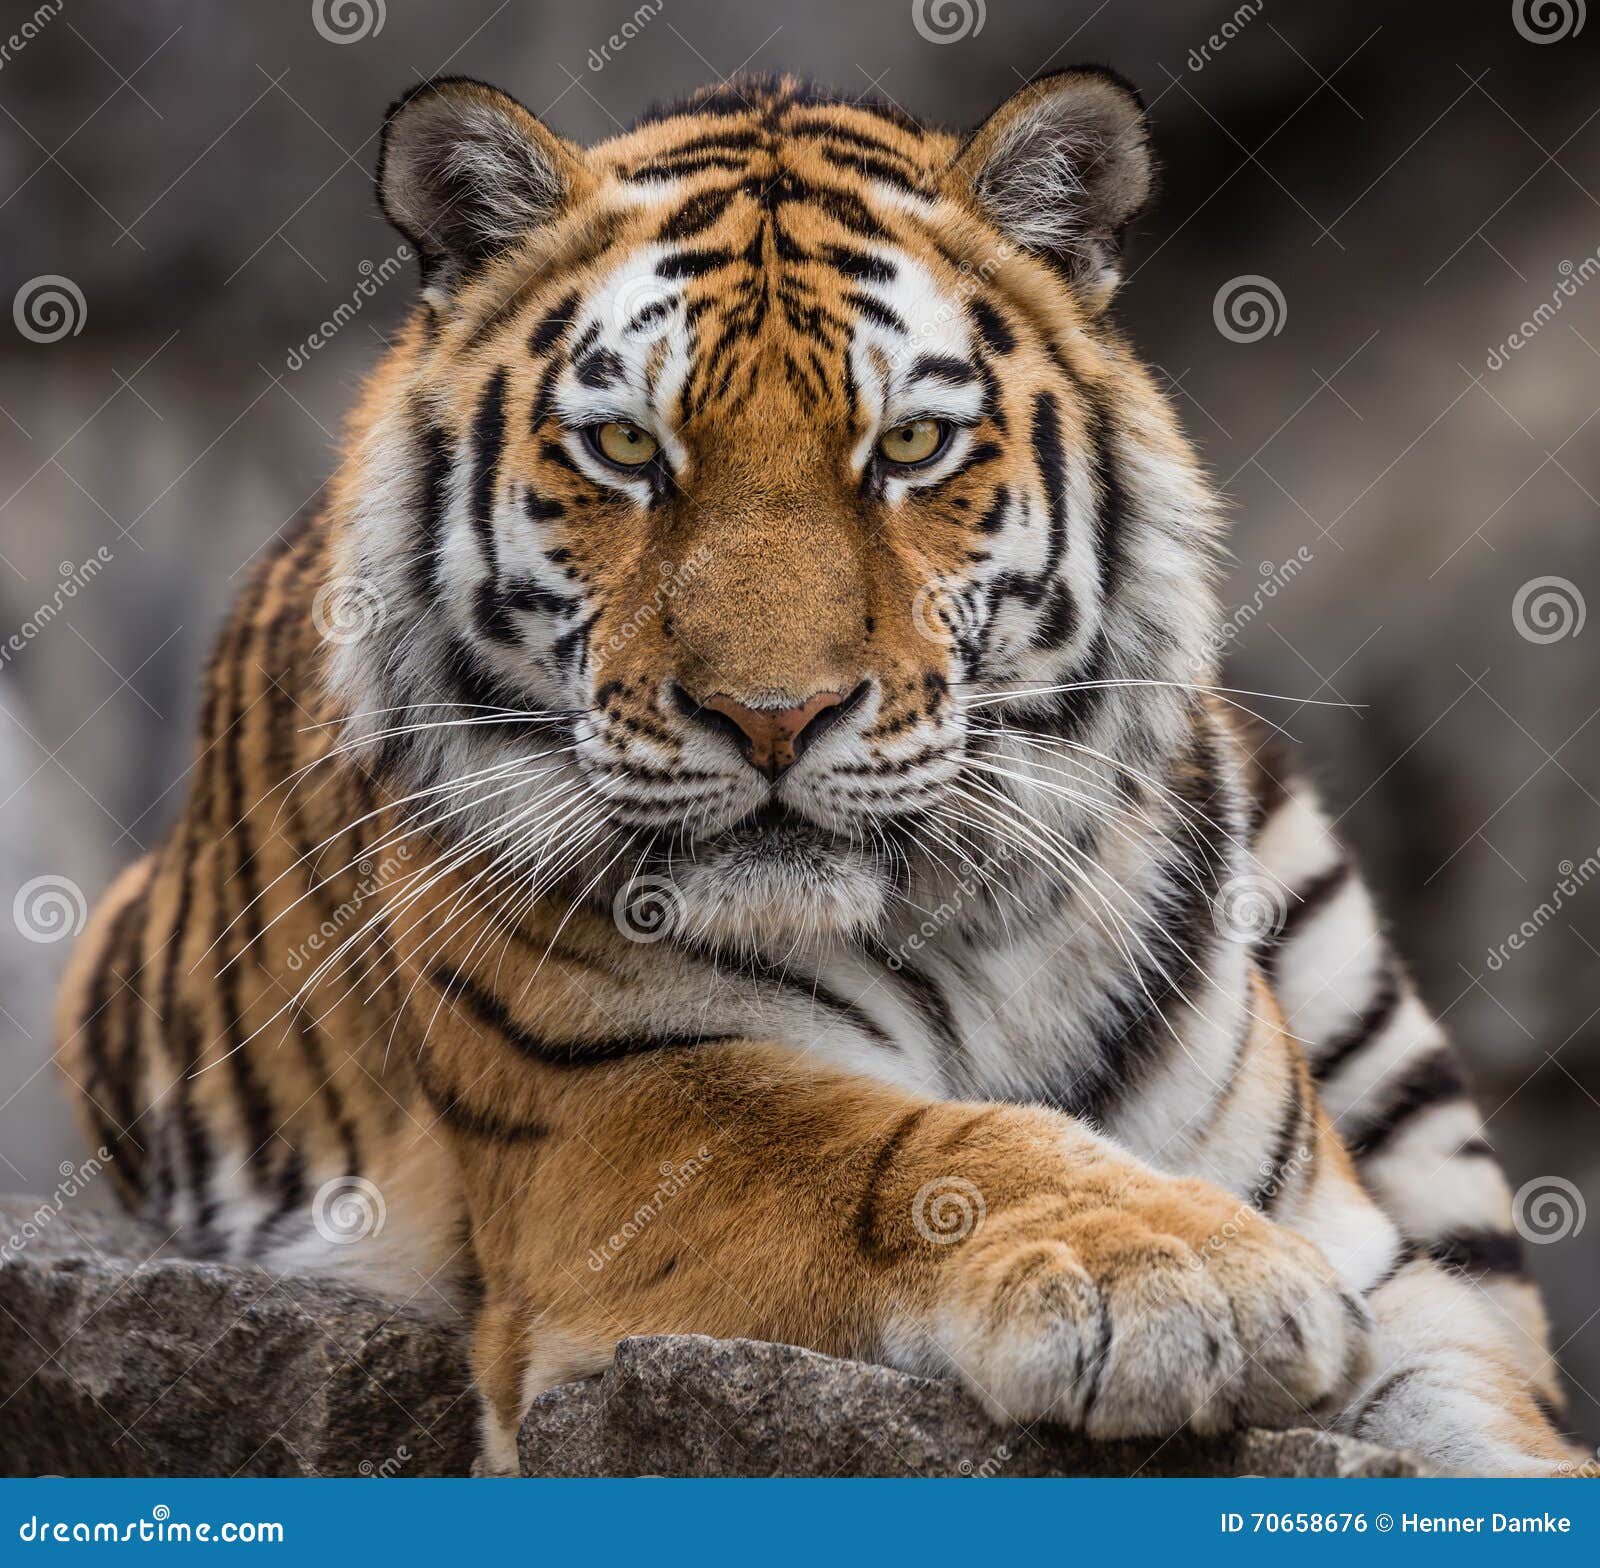 close up view of a siberian tiger